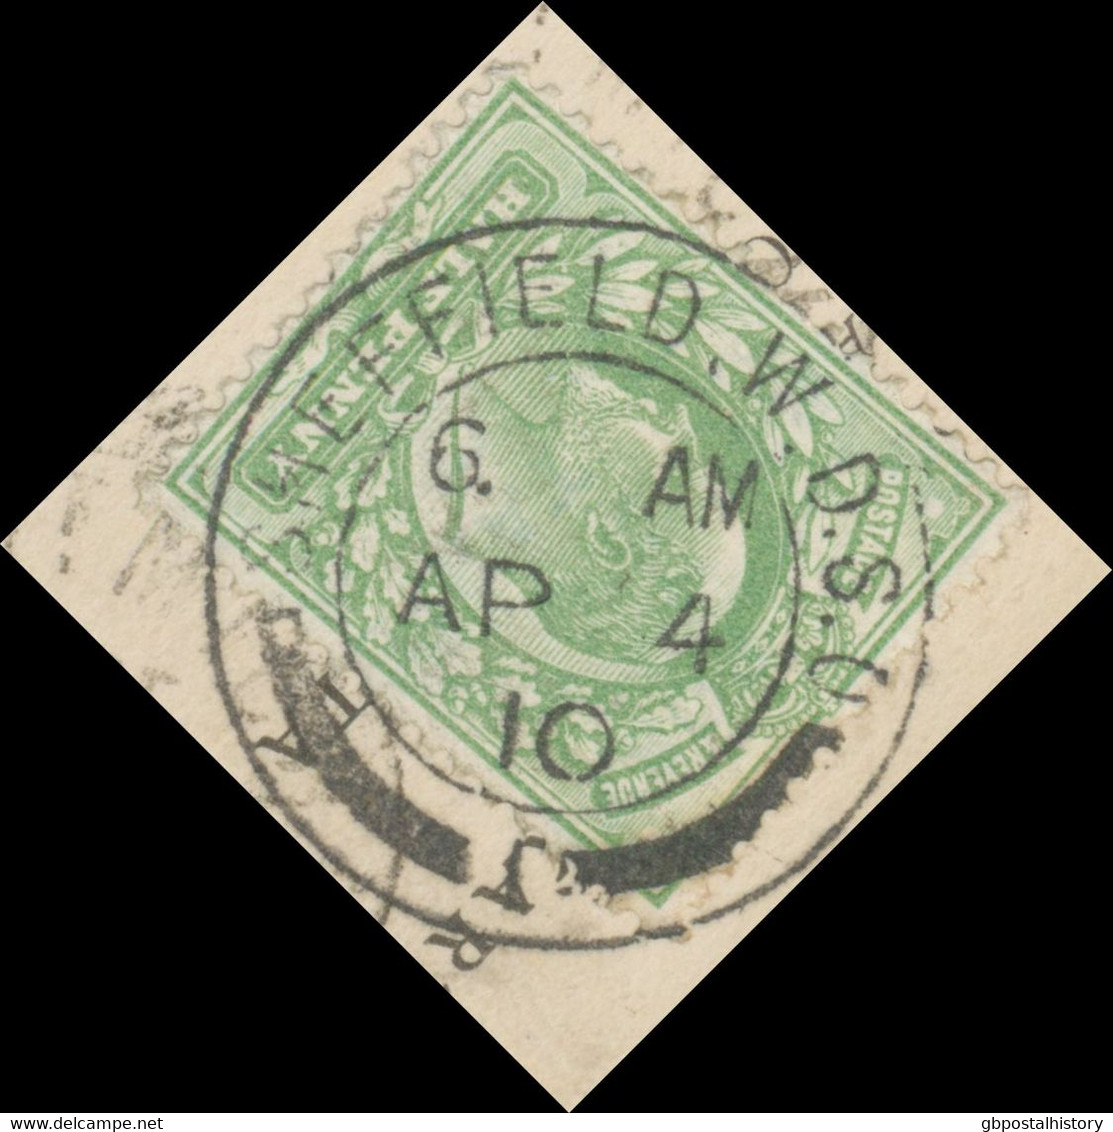 GB 1910 French Pc W 10C From Mont St. Michel REDIRECTED In SHEFFIELD, YORKSHIRE - Cartas & Documentos